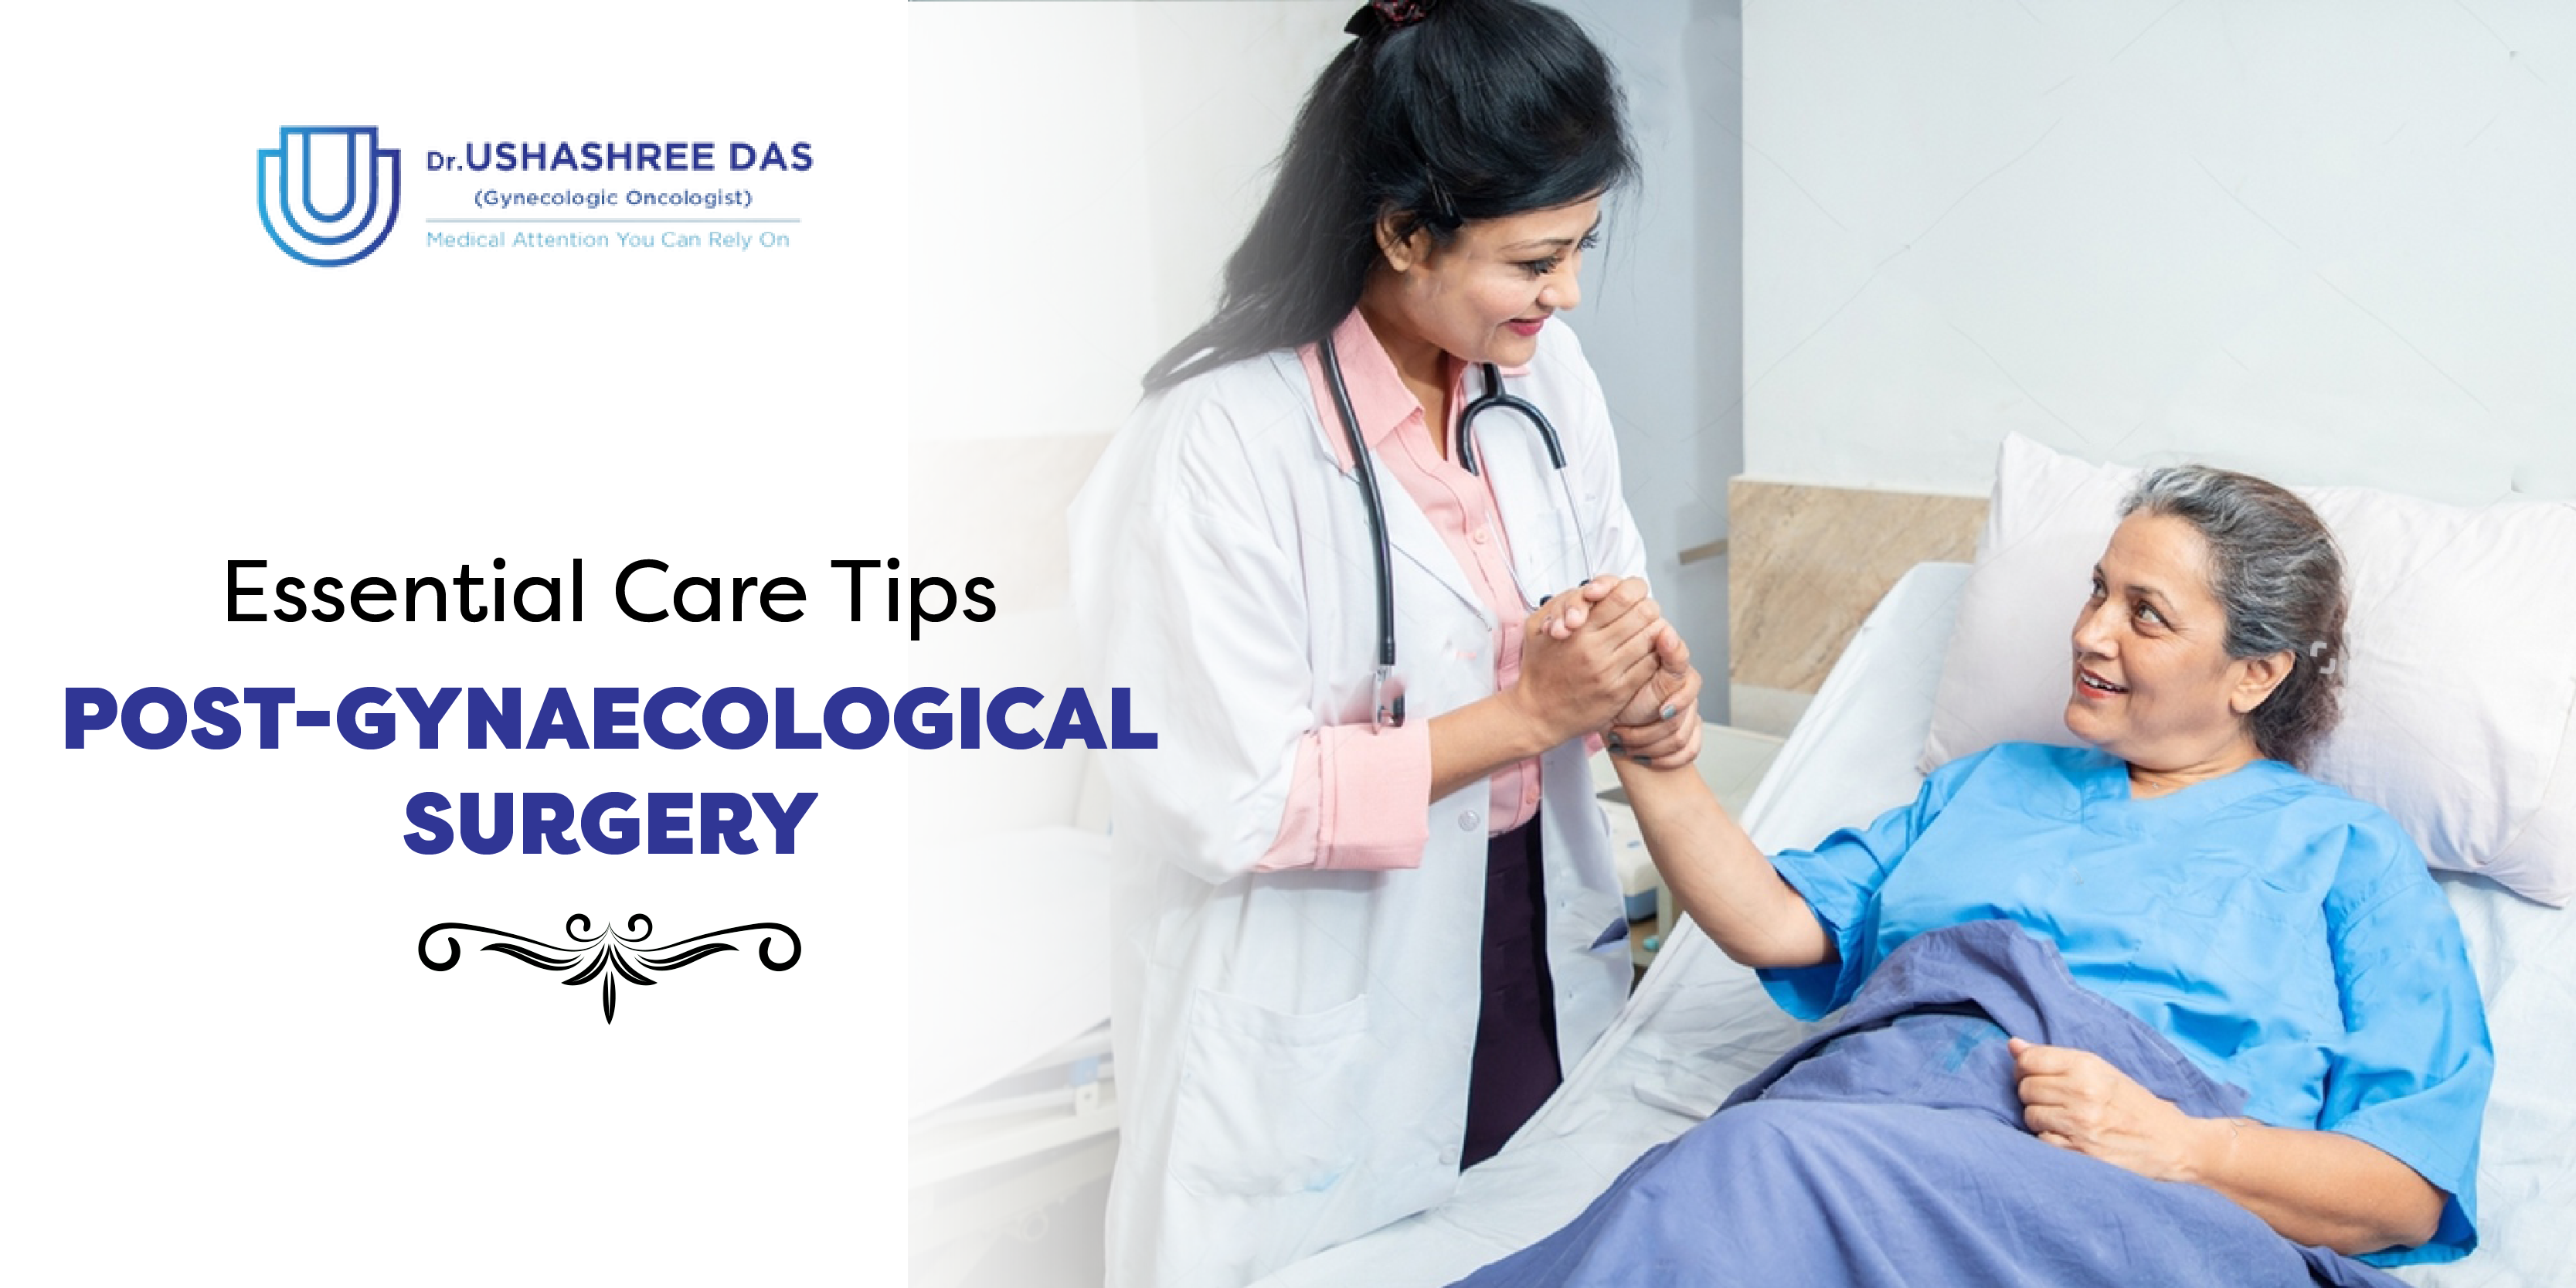 How To Recover From Gynecological Surgery?